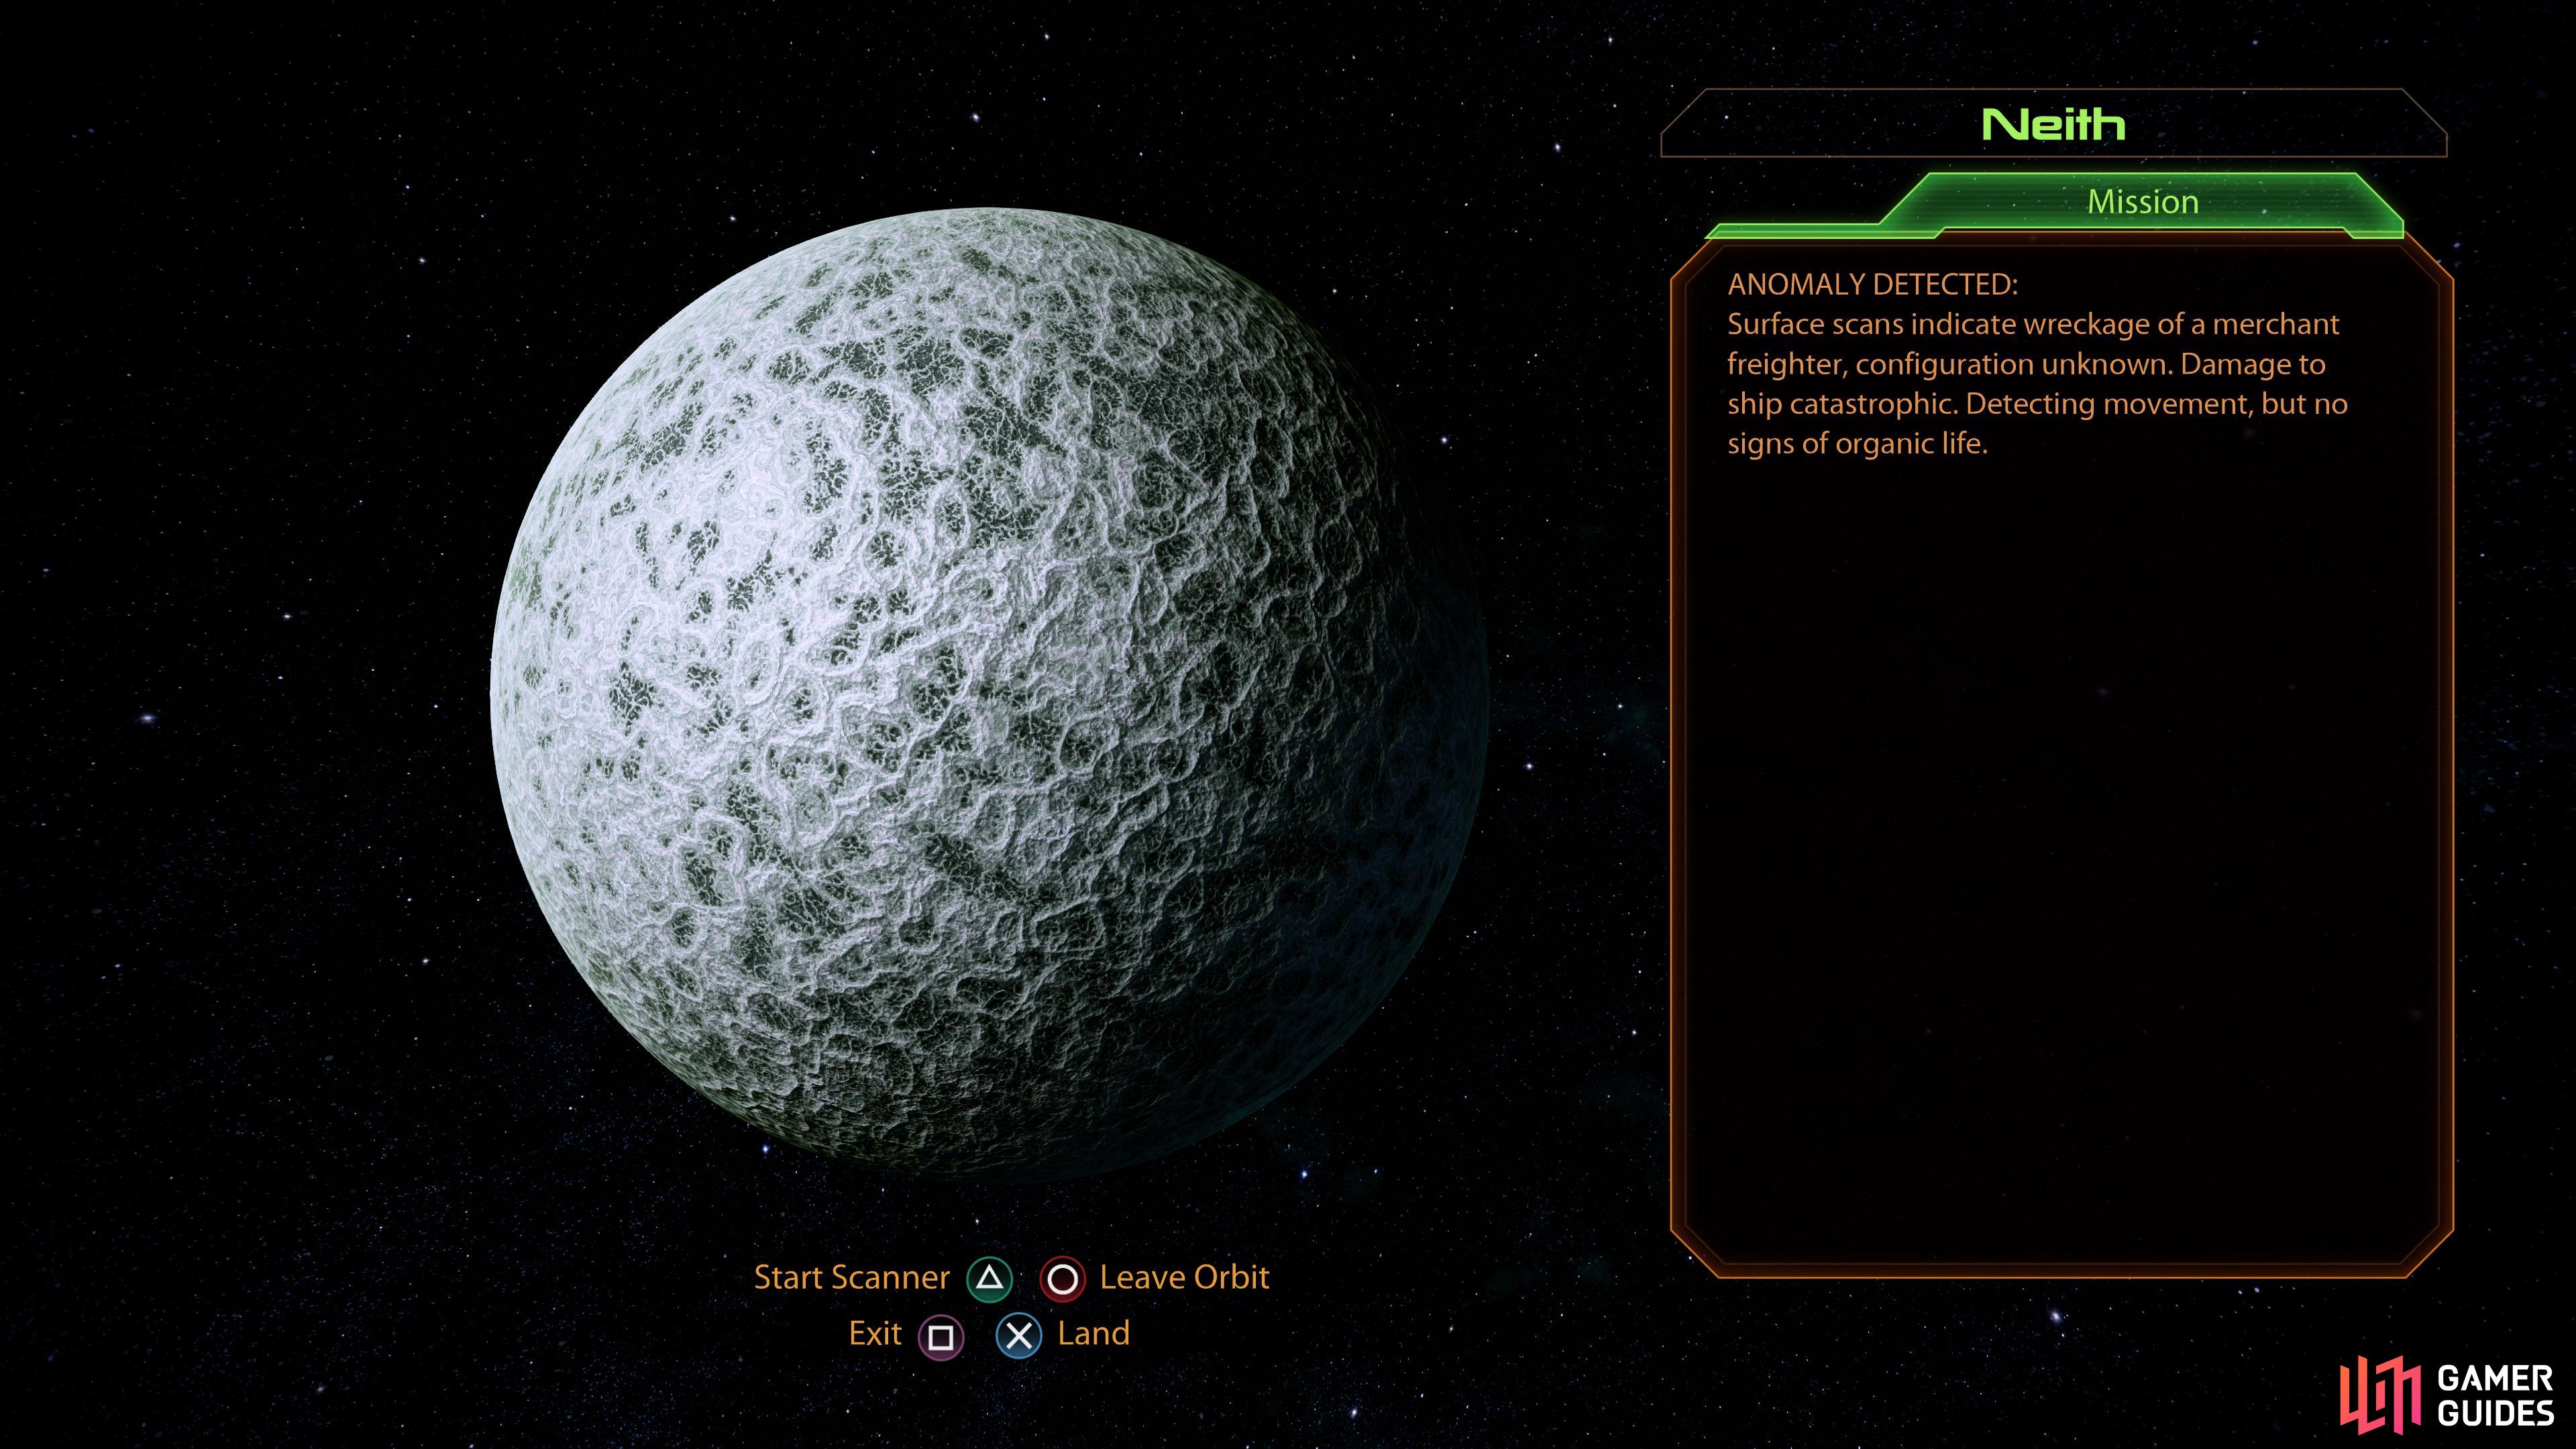 You can start this assignment by scanning and landing on the planet Neith.